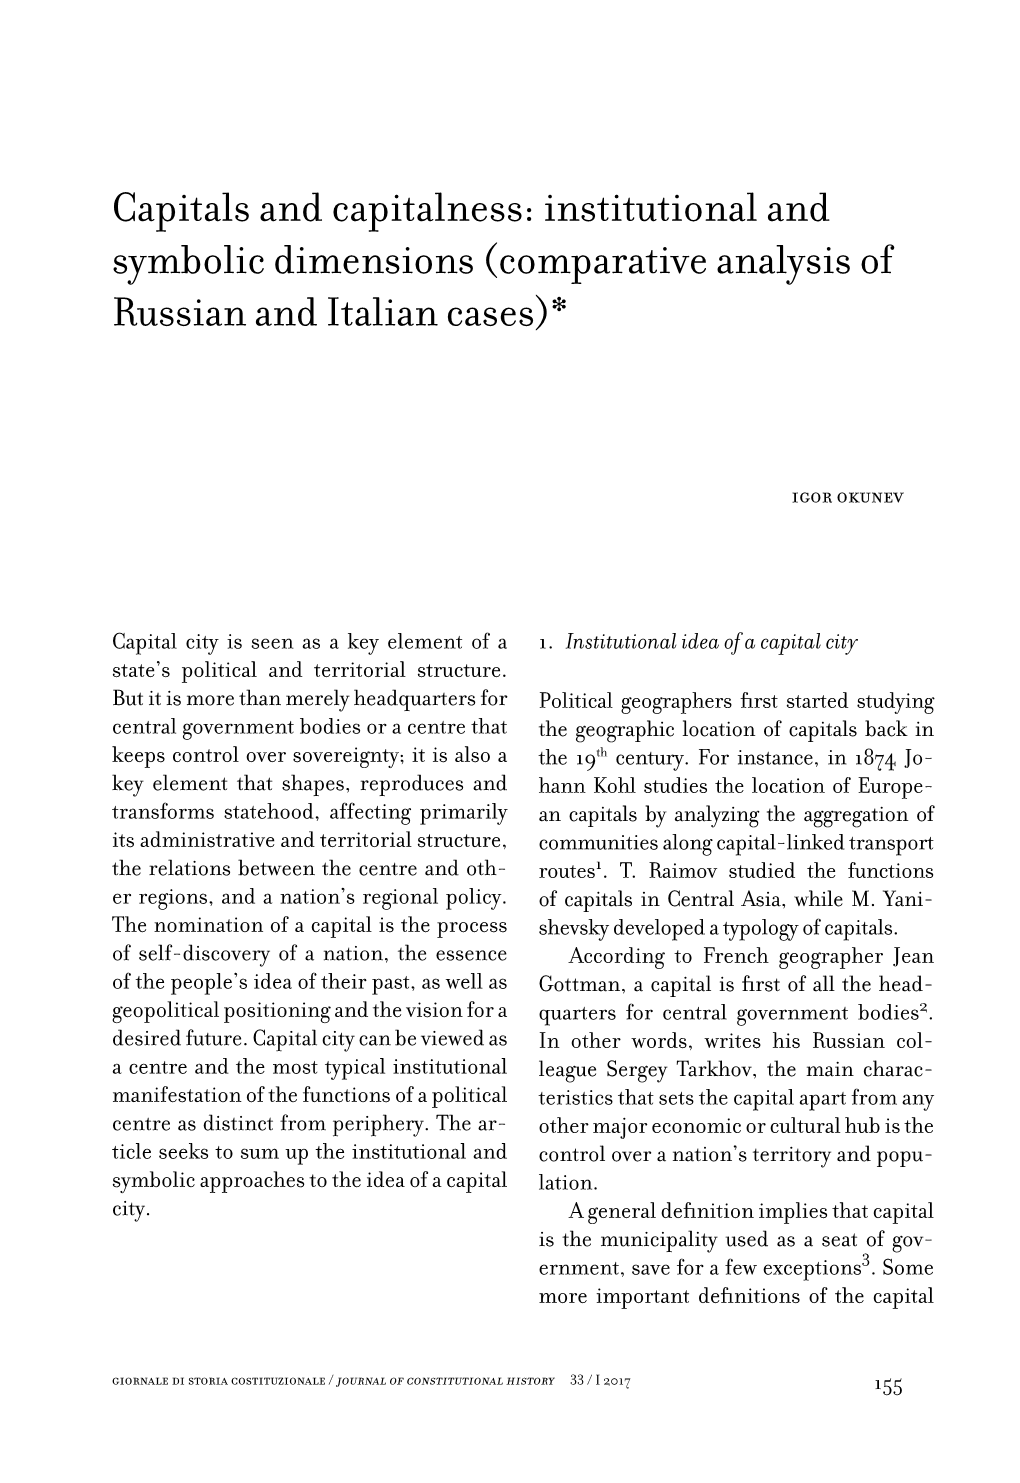 Institutional and Symbolic Dimensions (Comparative Analysis of Russian and Italian Cases)*